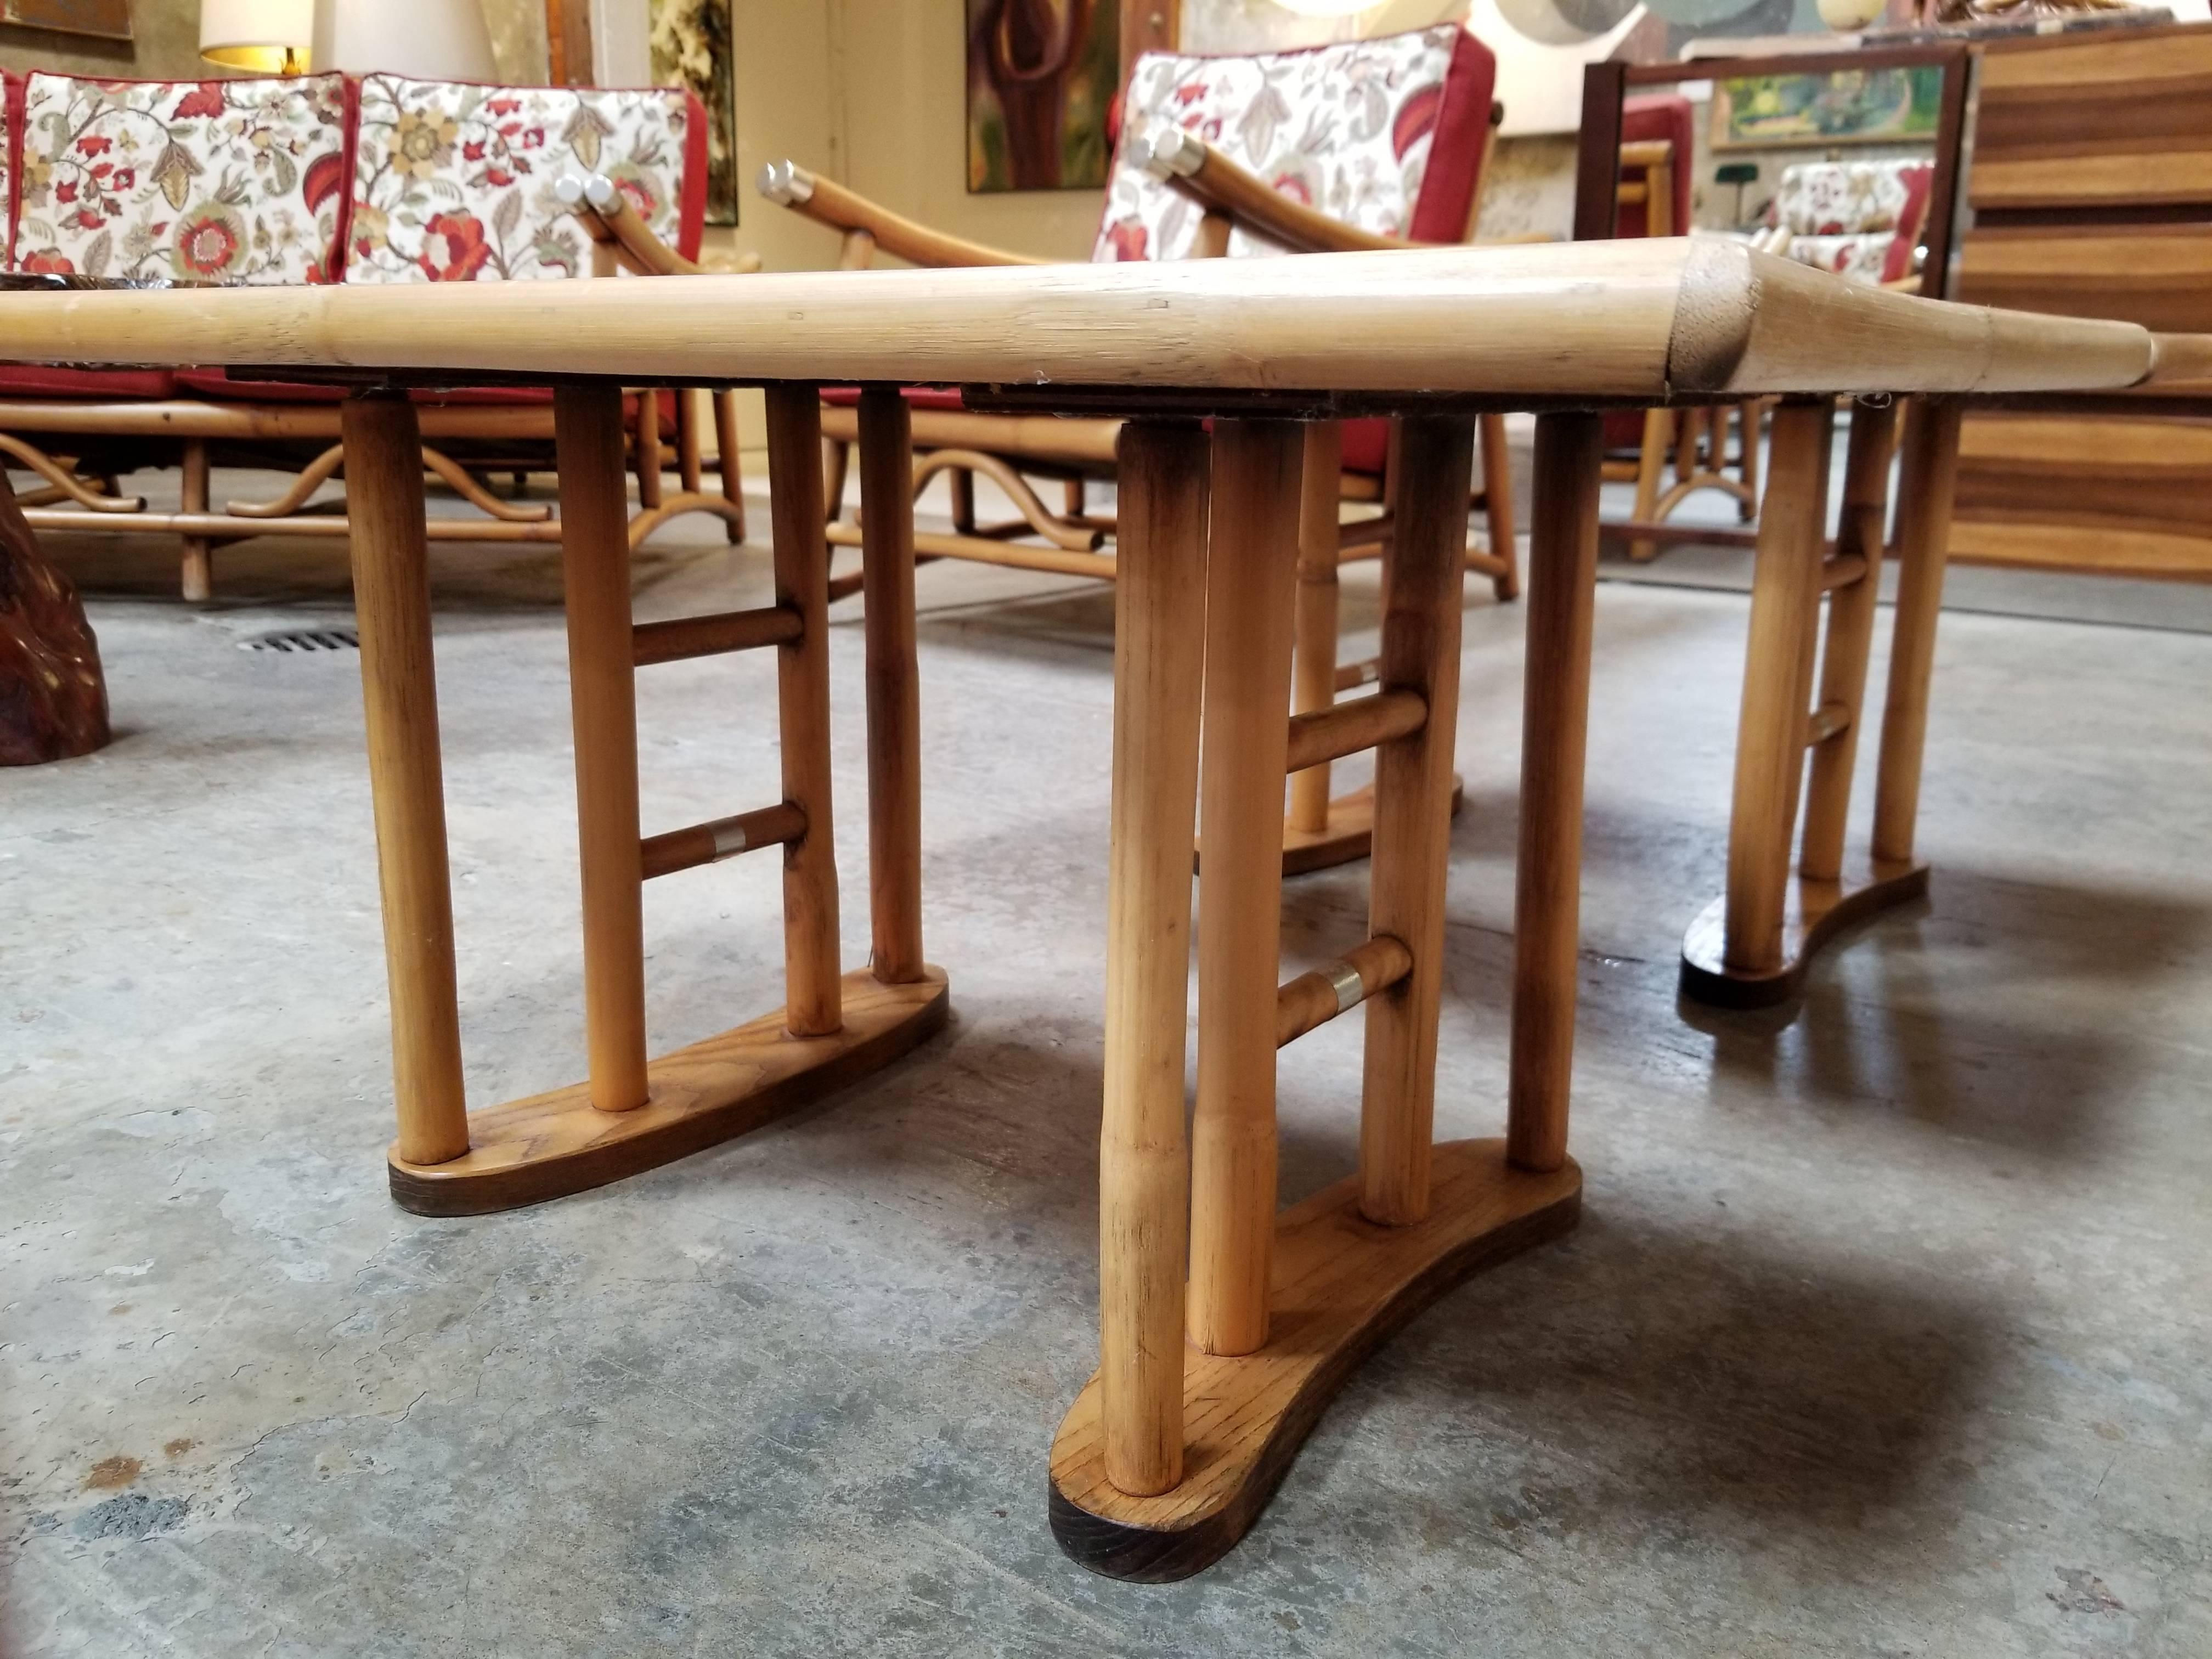 Pair of rattan end tables with faux wood grain formica tops.